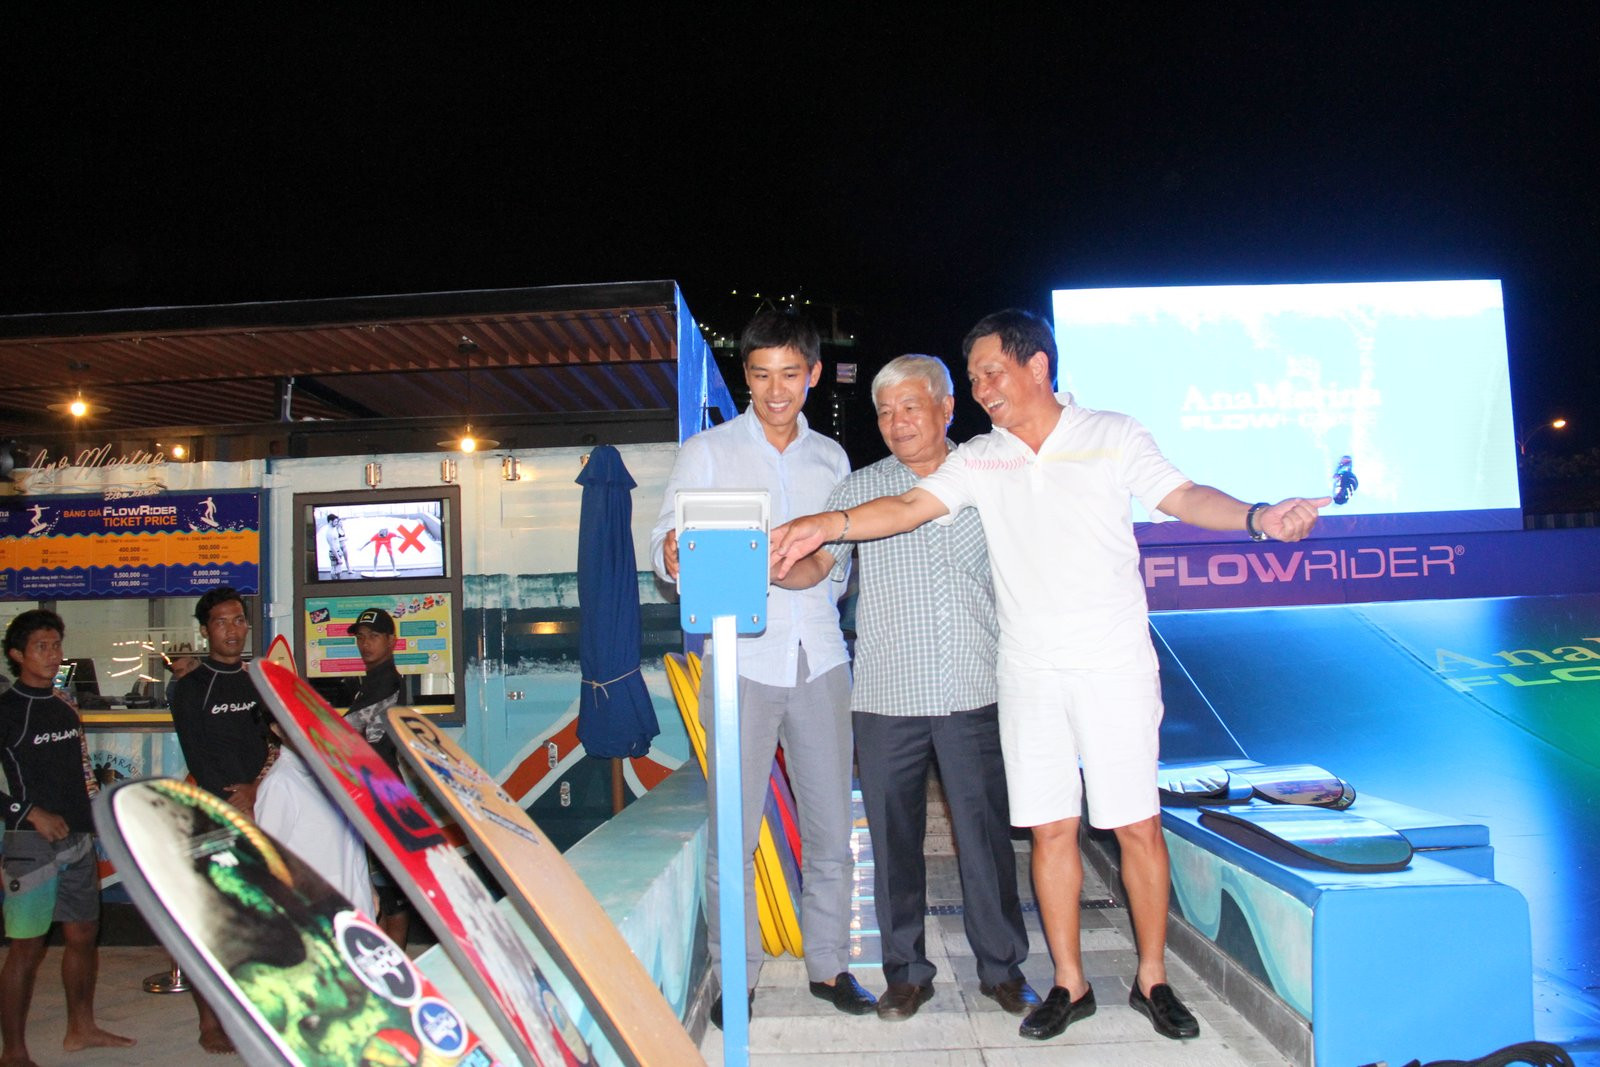 Representatives pressing launching button at opening ceremony of Ana Marina Flowhouse